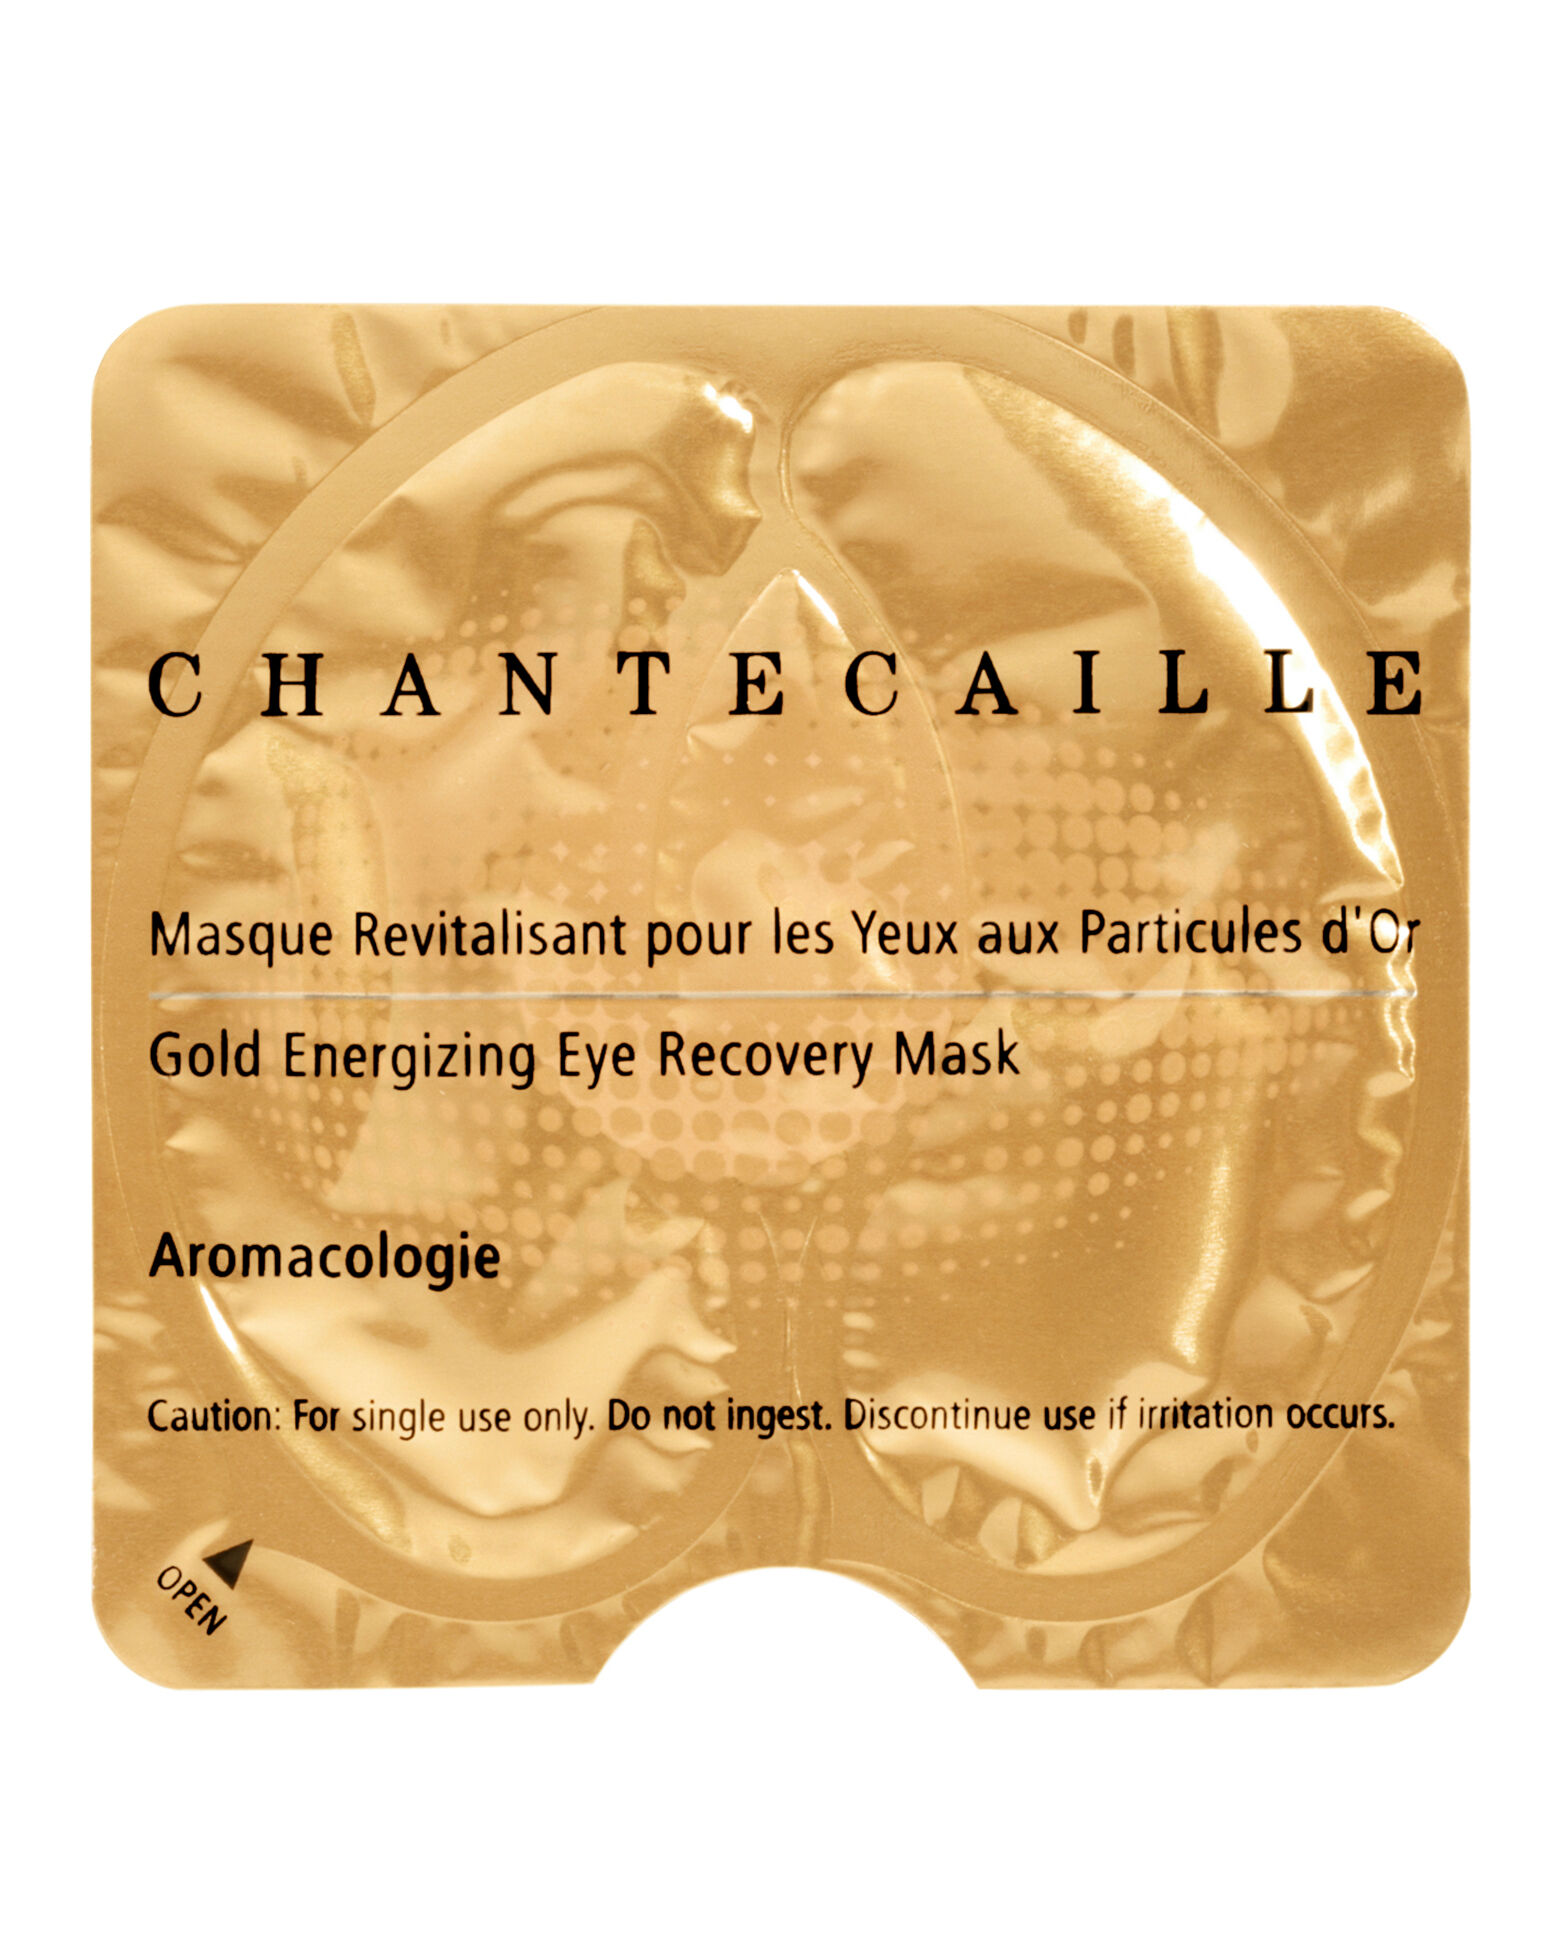 Chantecaille - Gold Energizing Eye Recovery Mask